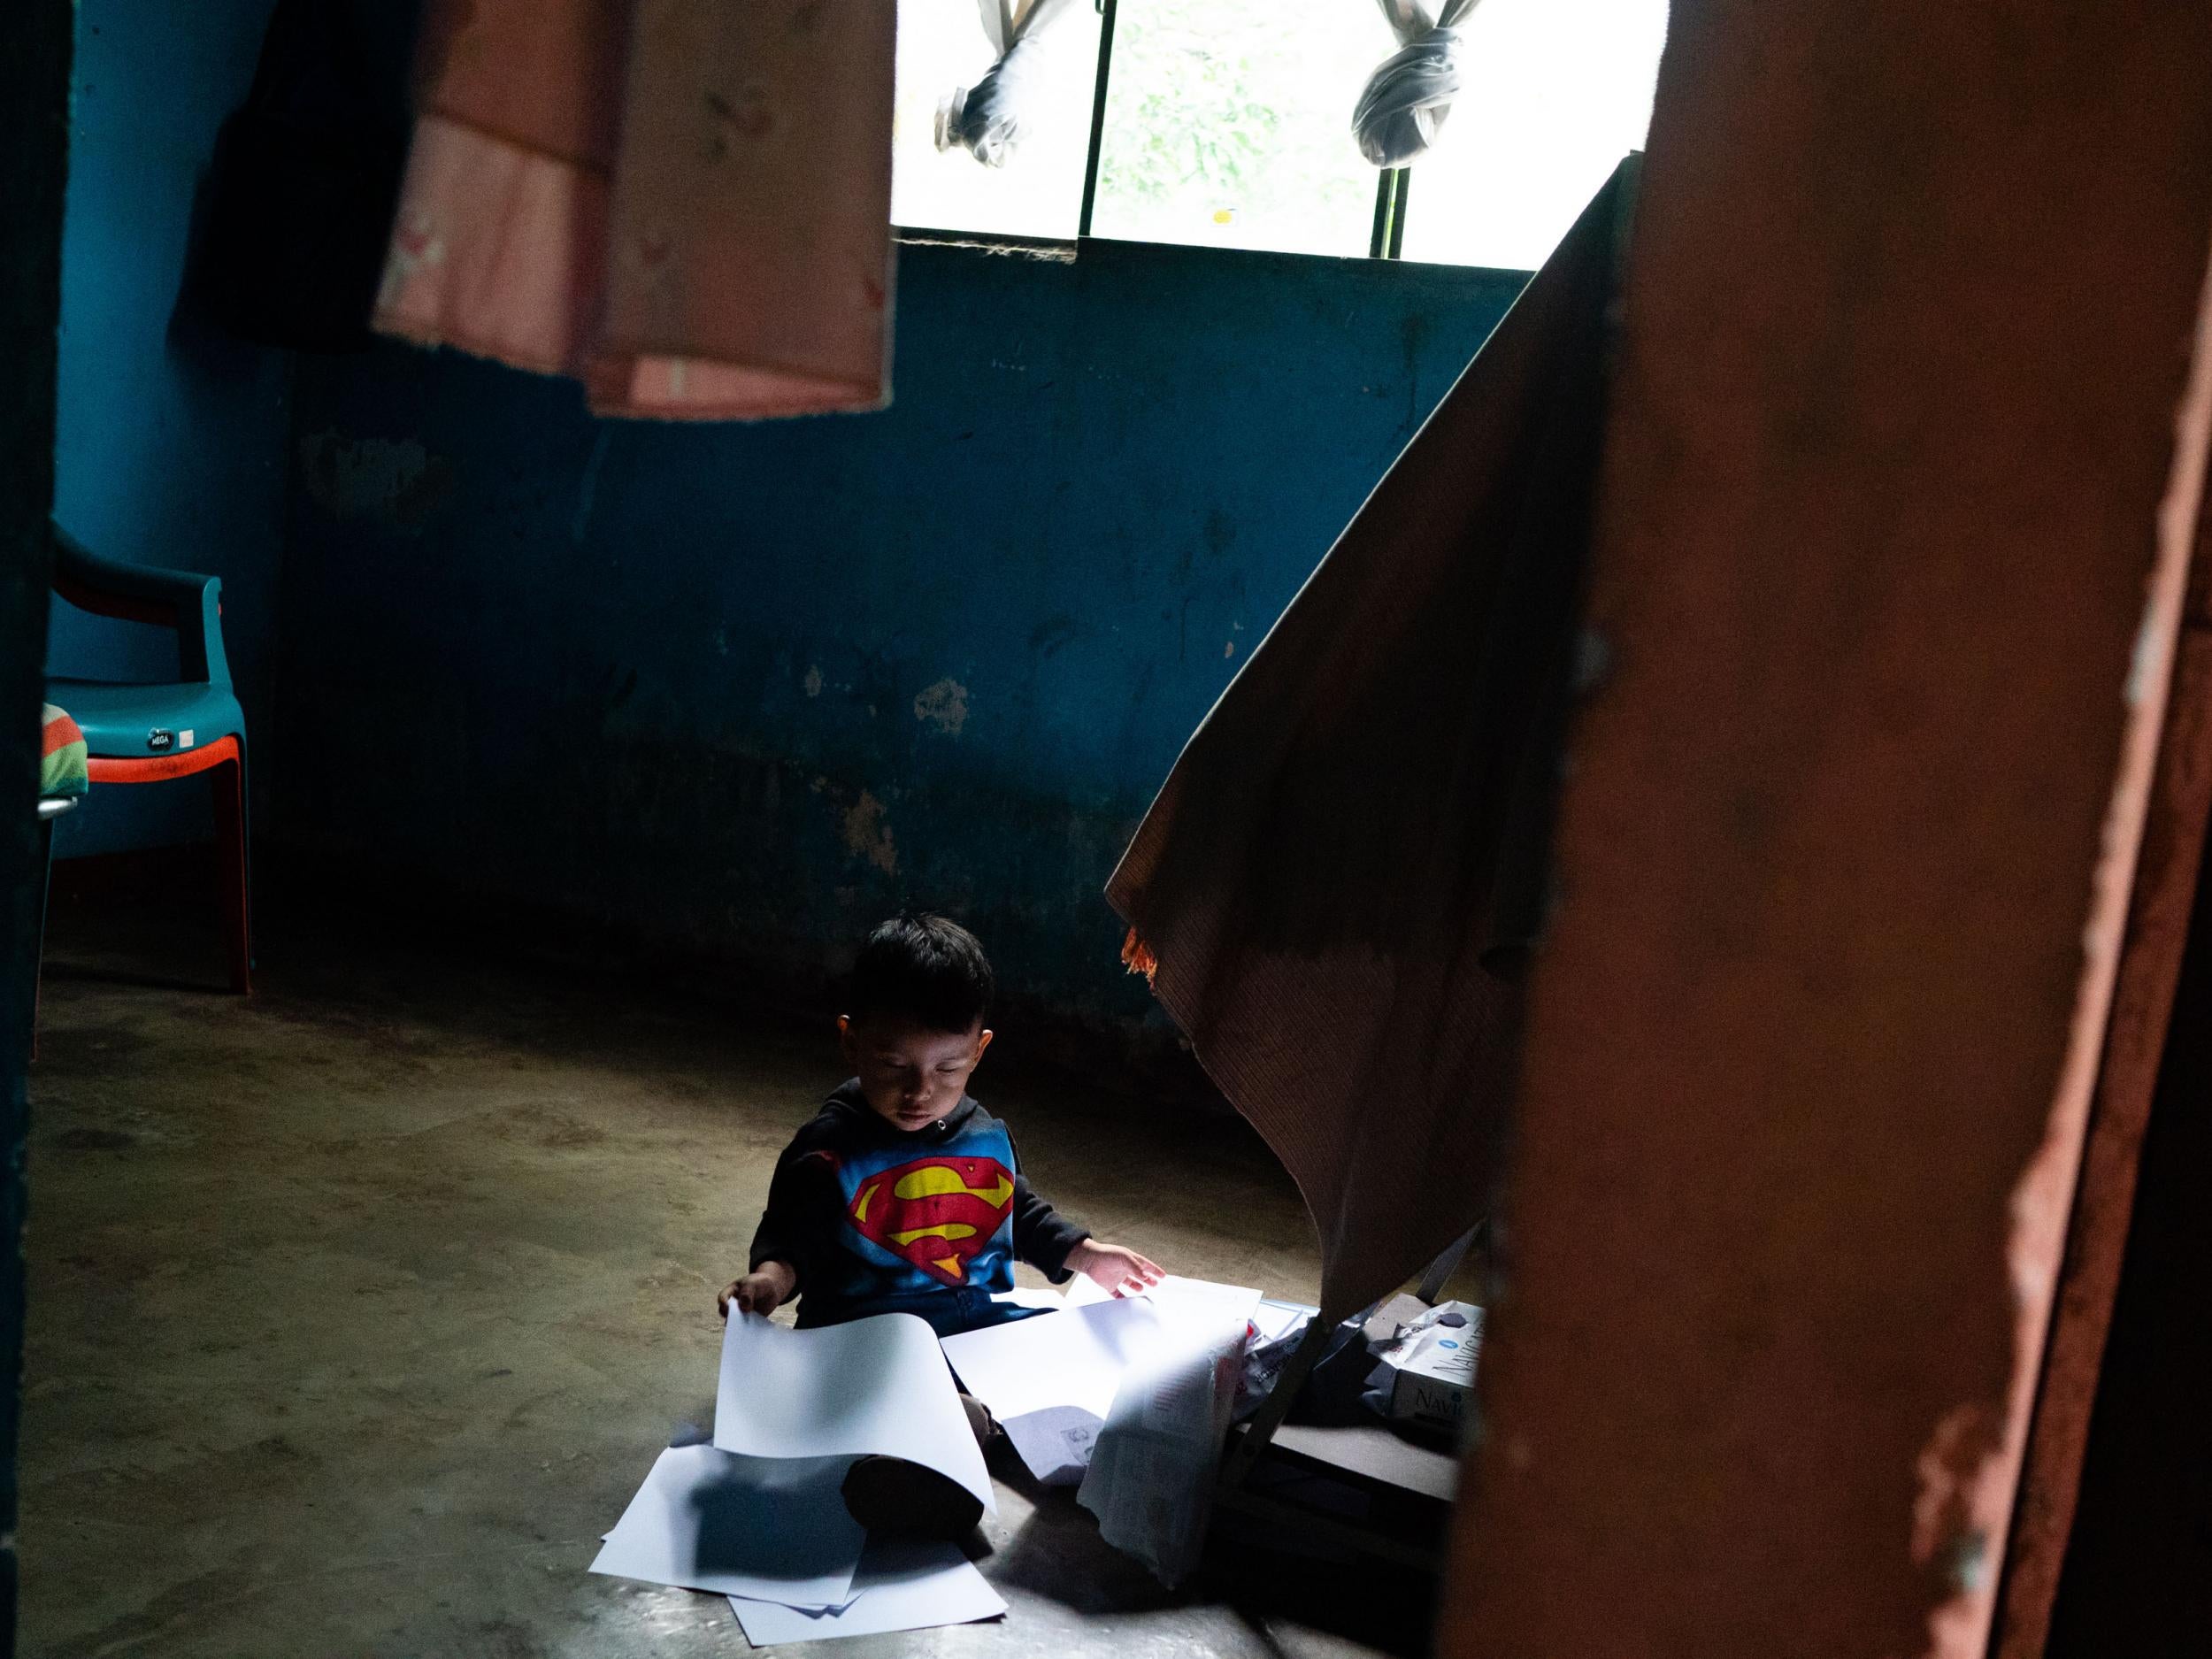 Two-year-old Keyler Herrera plays in the home of his grandfather Camposeco (The Washington Post)